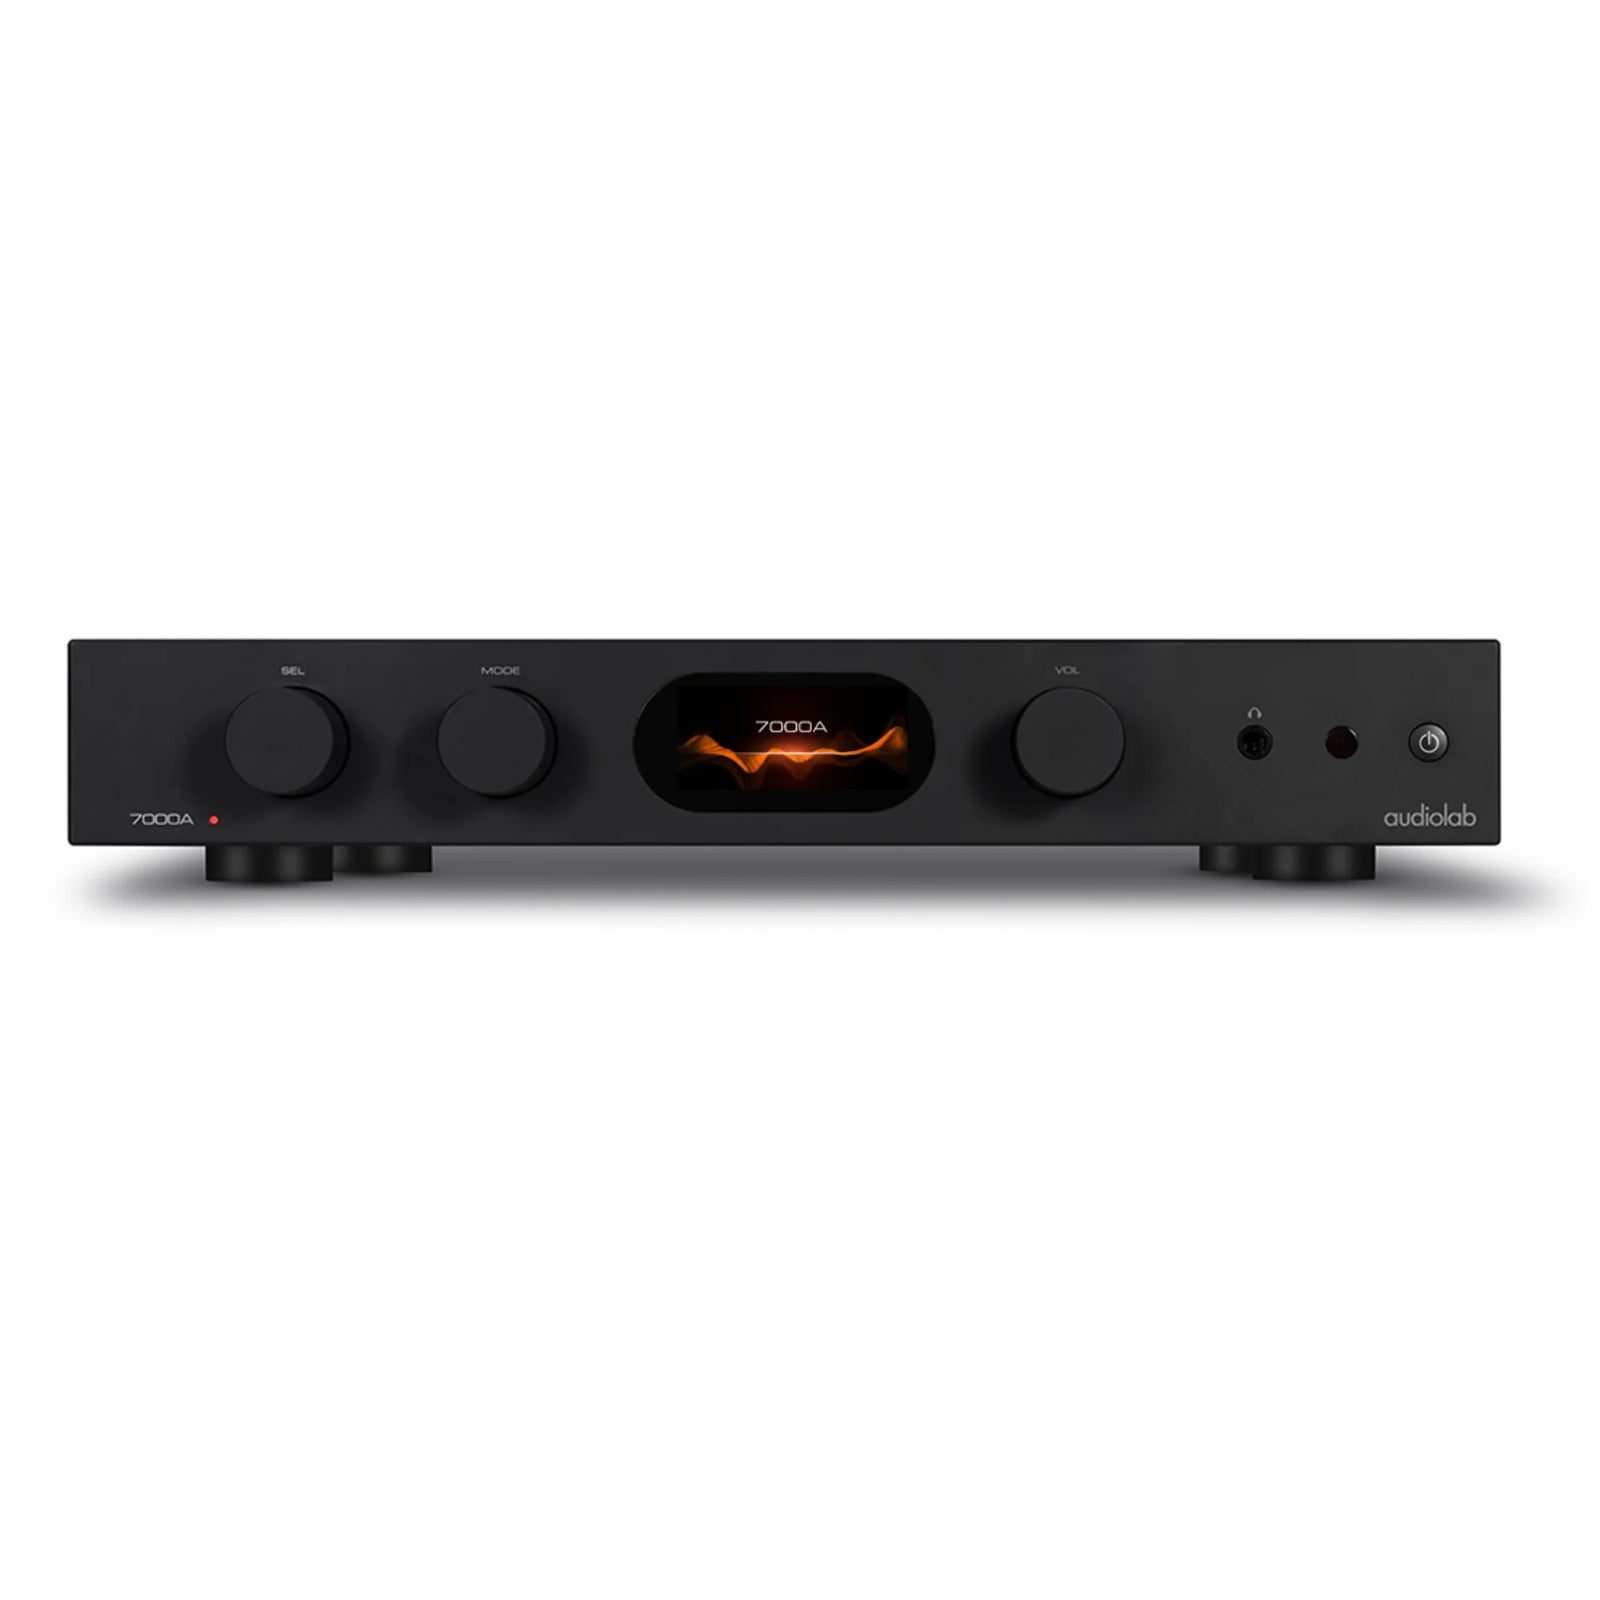 Nestled between the 6000 and 9000, the 7000 fuses premium traits into a pricing category that follows the mantra of class-leading performance. Outwardly resembling the sequential series and therefore oﬀering a brand-wide visual aesthetic match, the audiolab 7000A improves on the 6000A with a genuine 70W per channel output, a new DAC, a new full-colour IPS LCD screen and more!